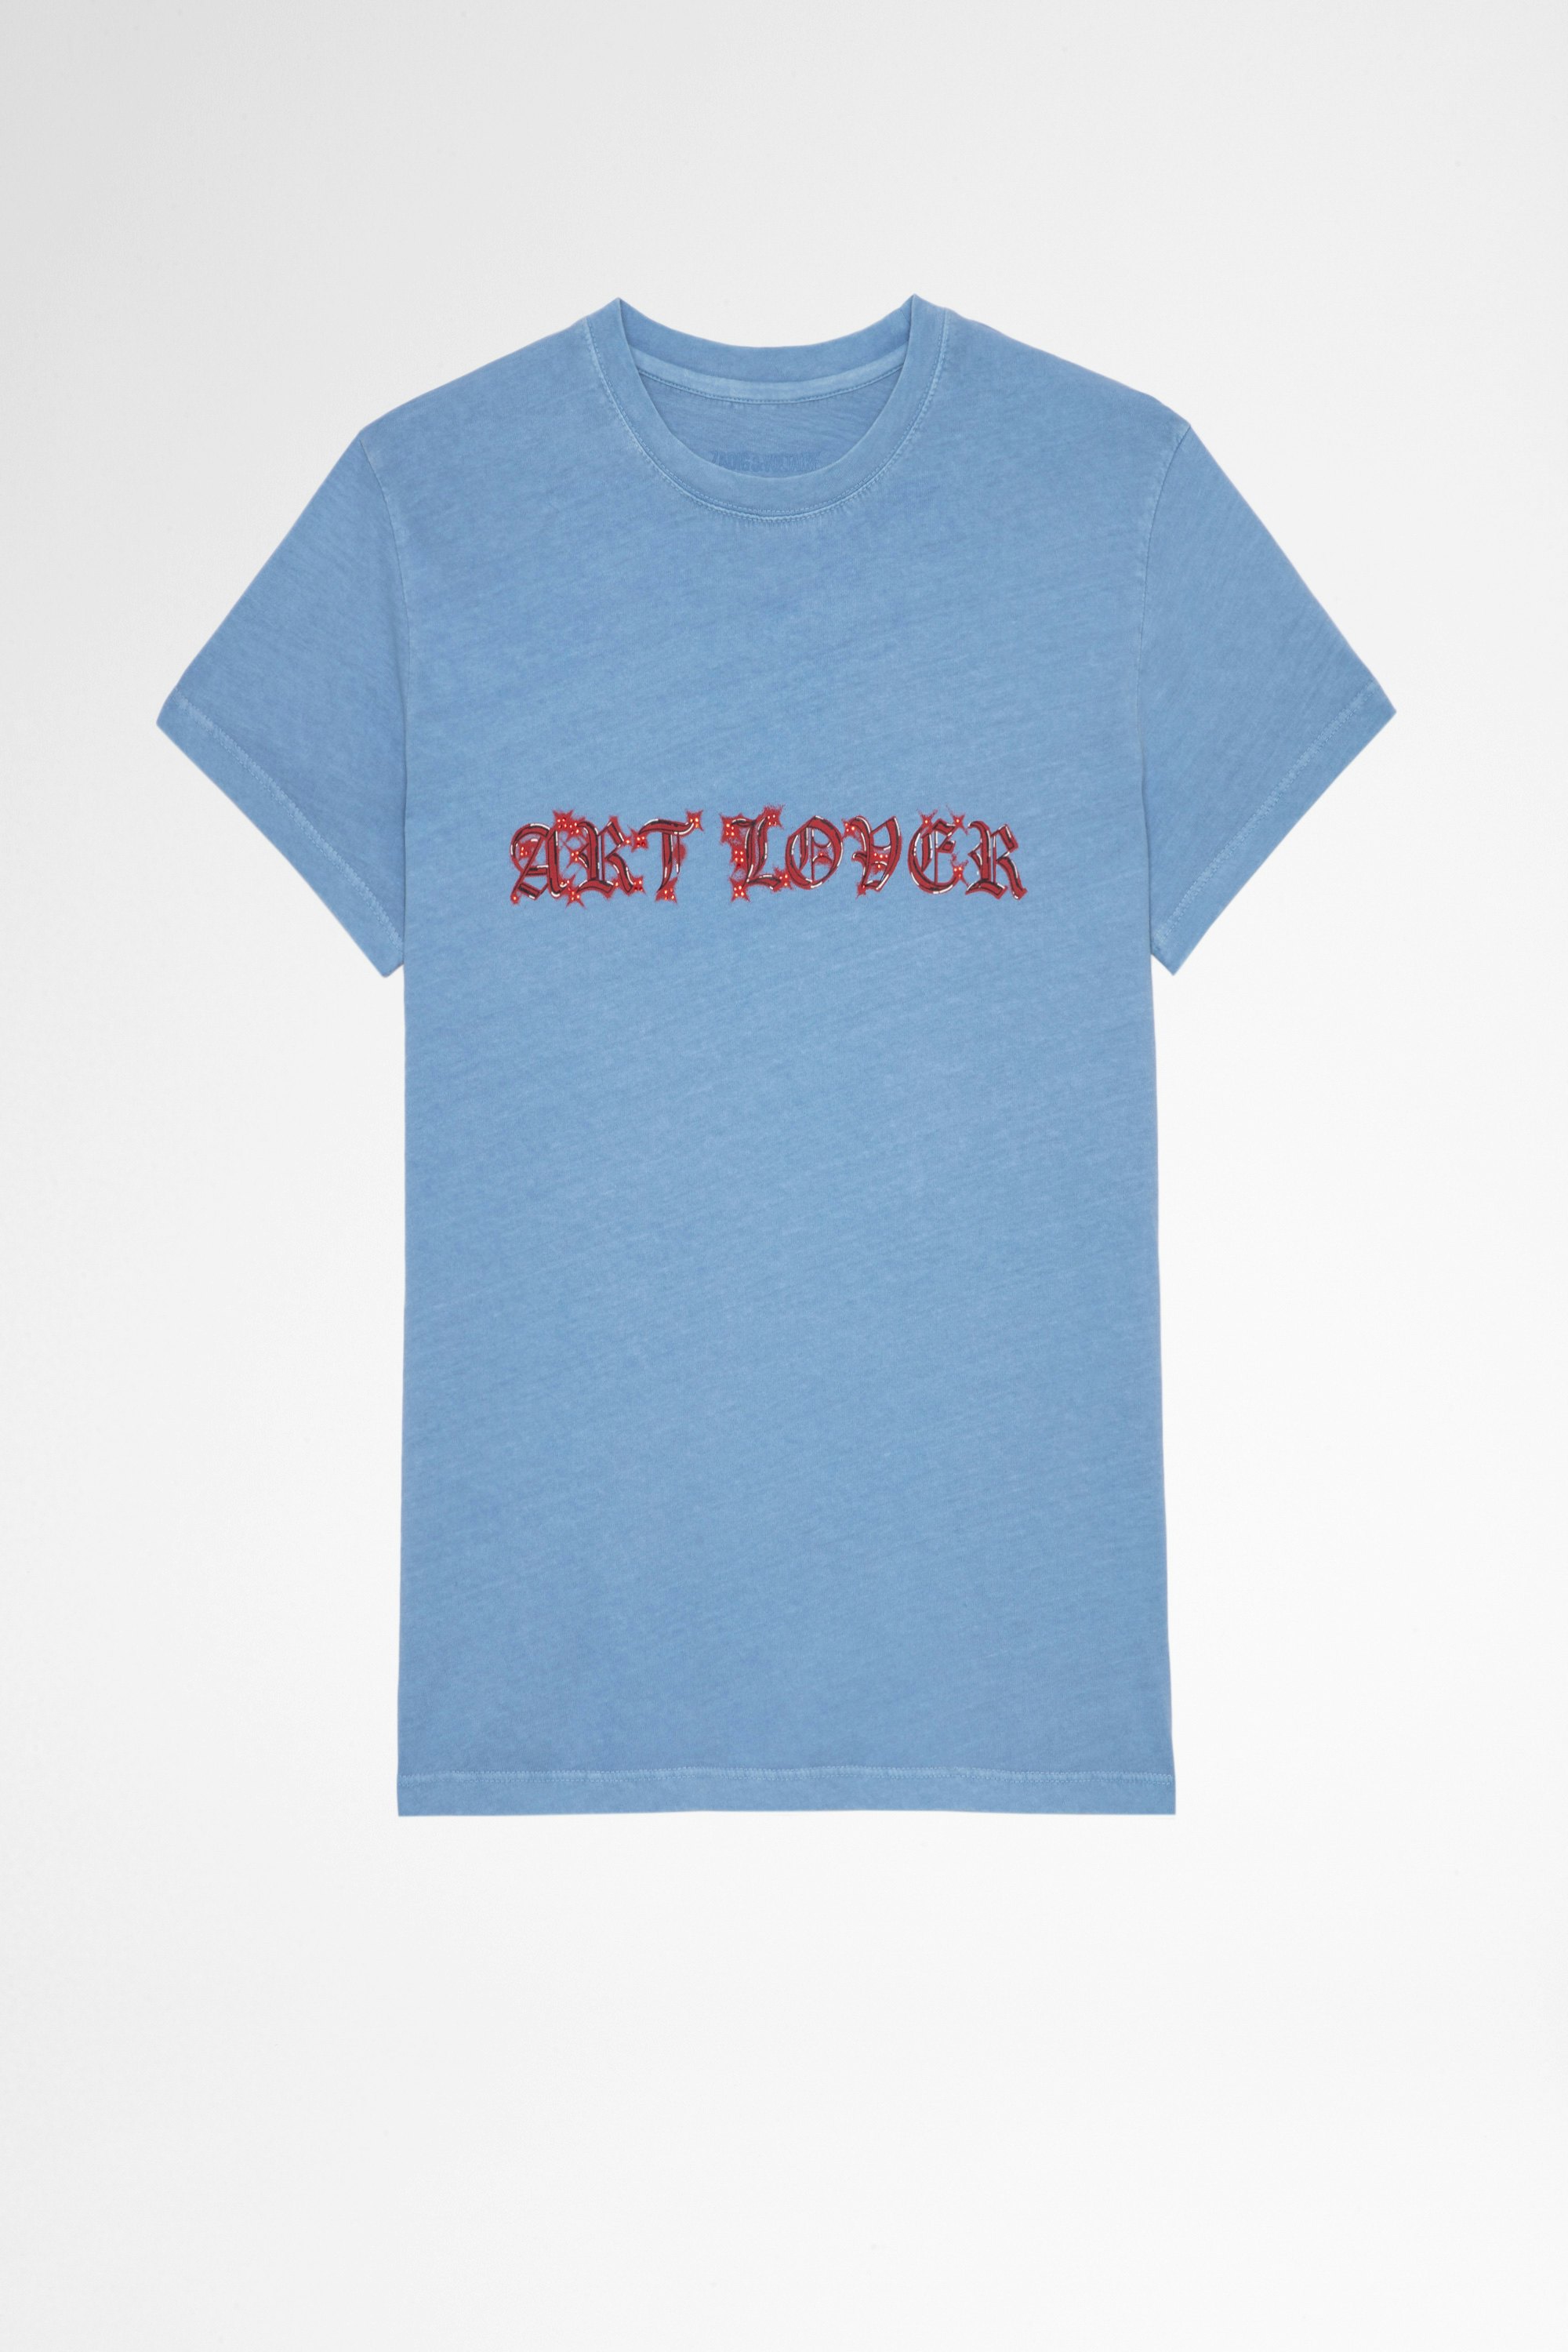 Zoe Art Lover T-shirt Women's sky-blue cotton T-shirt with Art Lover print and crystals